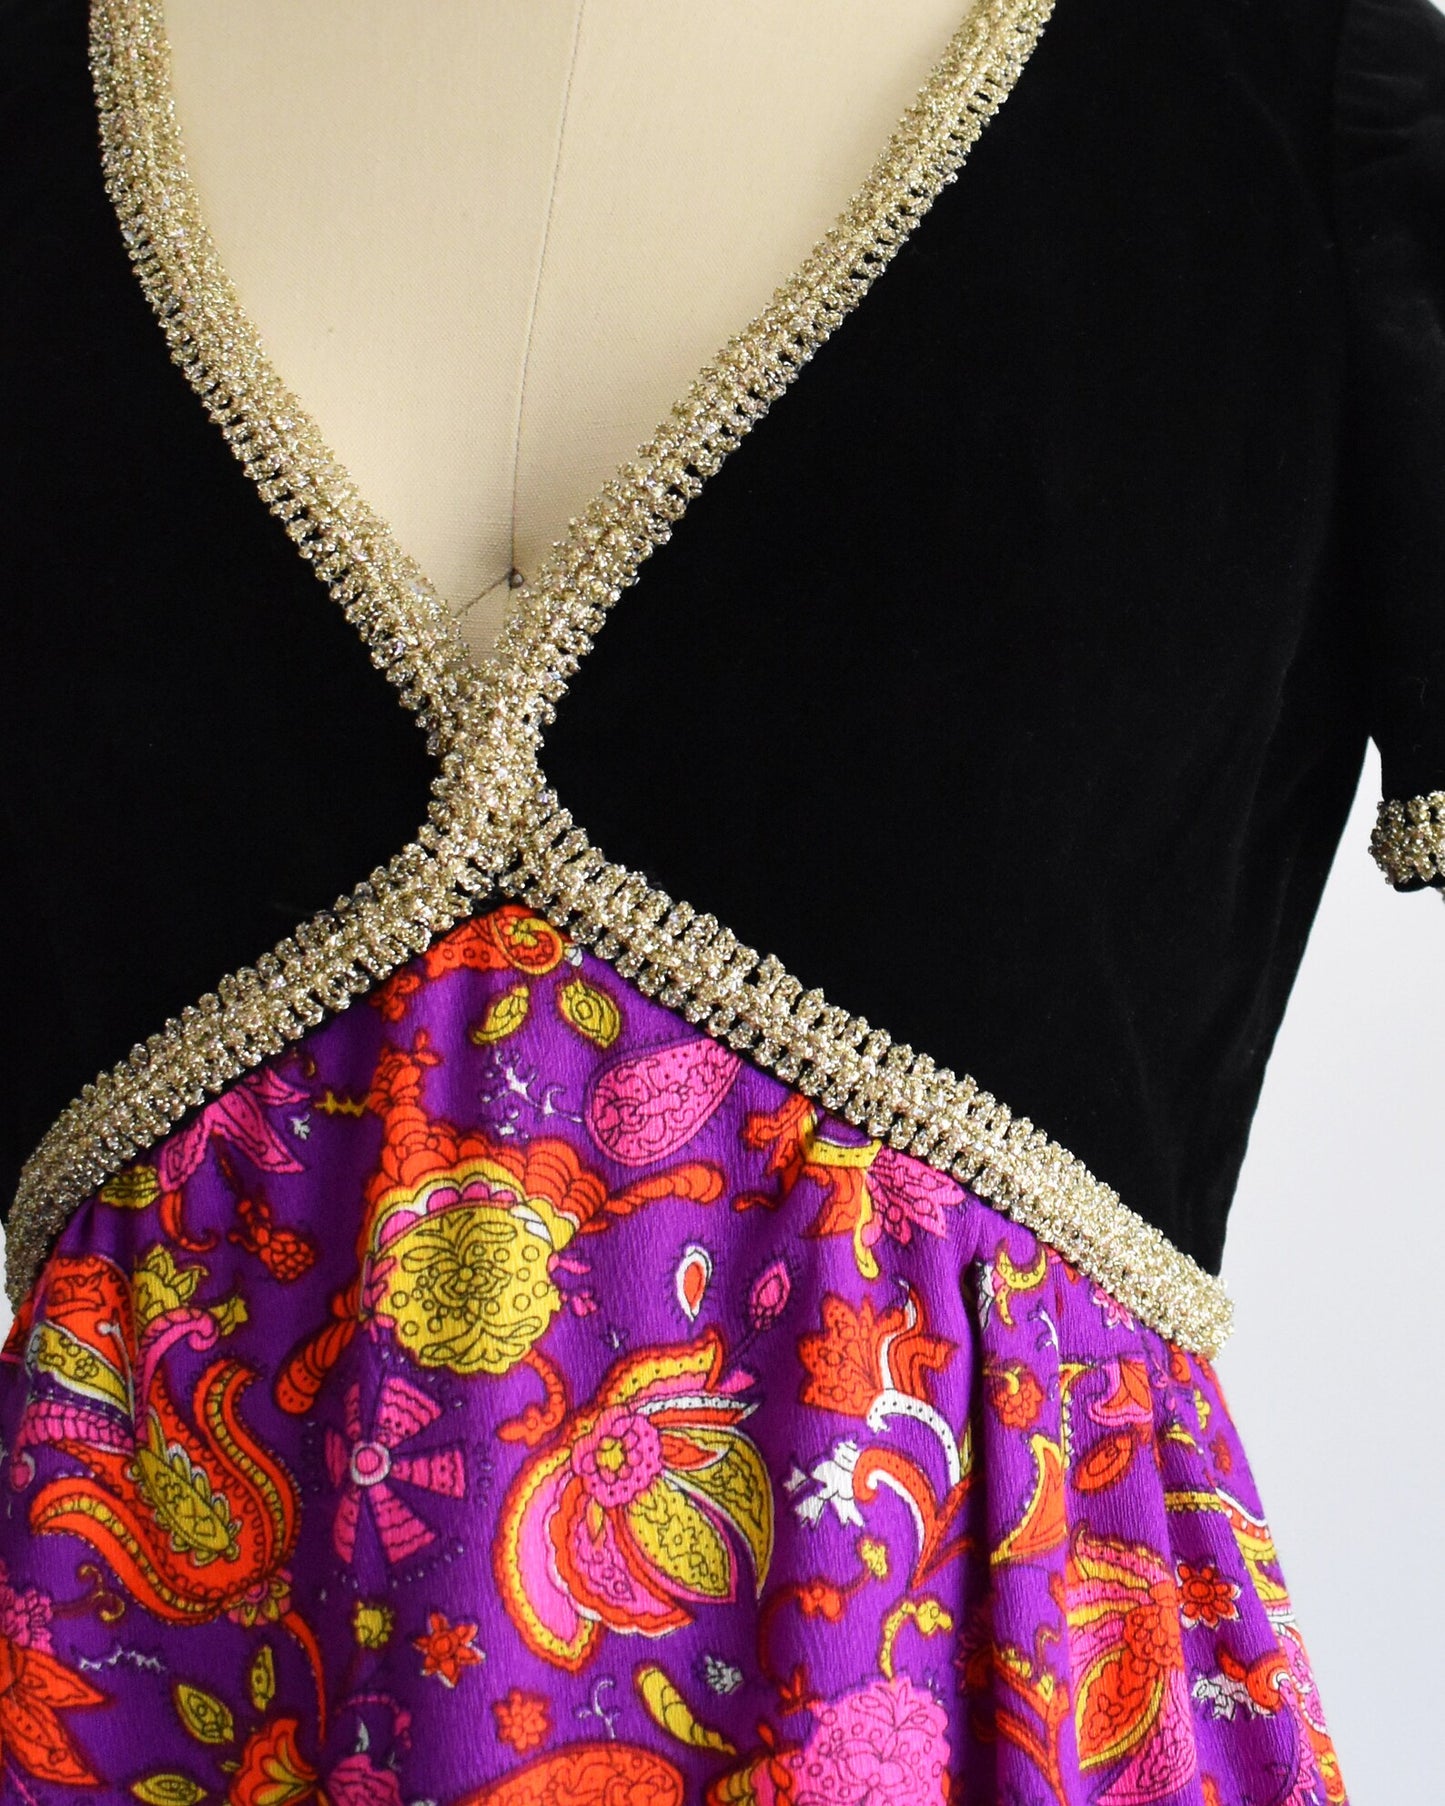 Close up of the bodice and empire waist area which shows the metallic gold ribbon trim